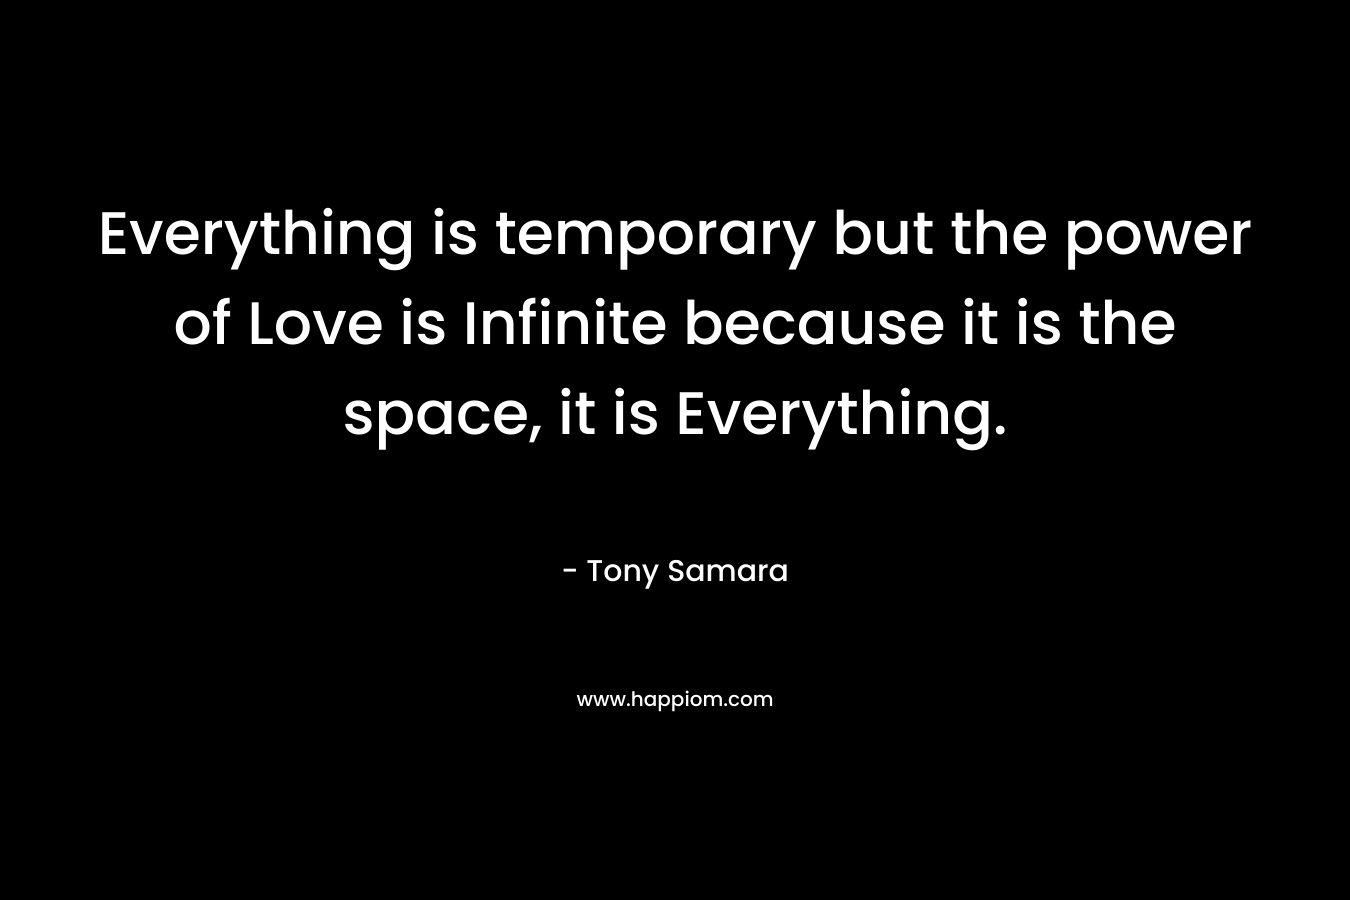 Everything is temporary but the power of Love is Infinite because it is the space, it is Everything.